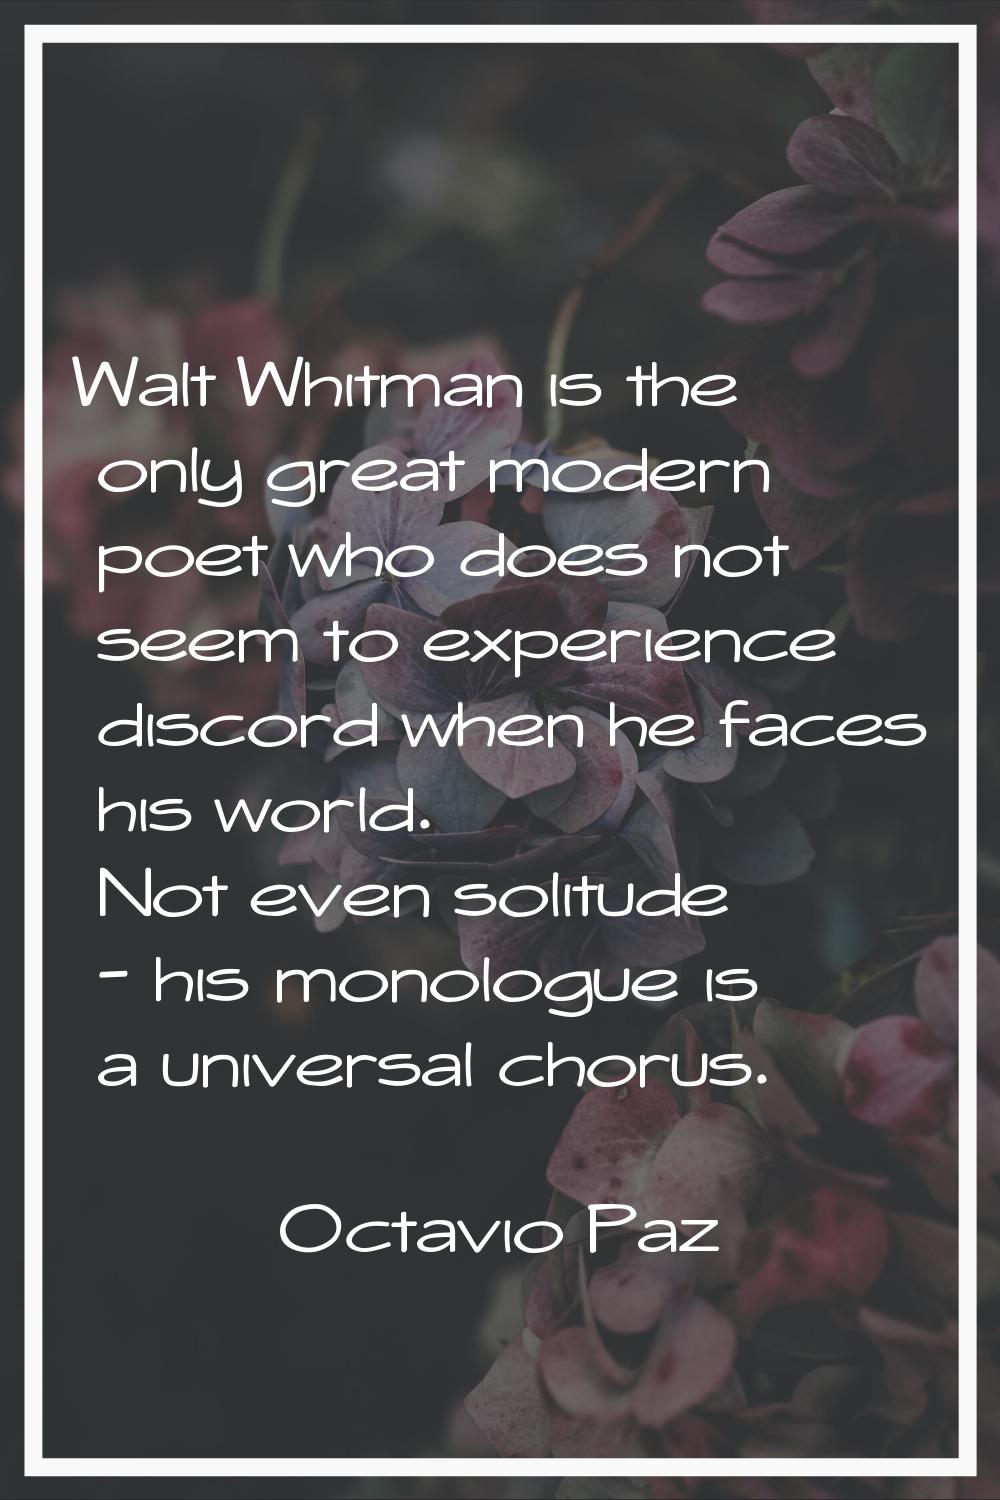 Walt Whitman is the only great modern poet who does not seem to experience discord when he faces hi